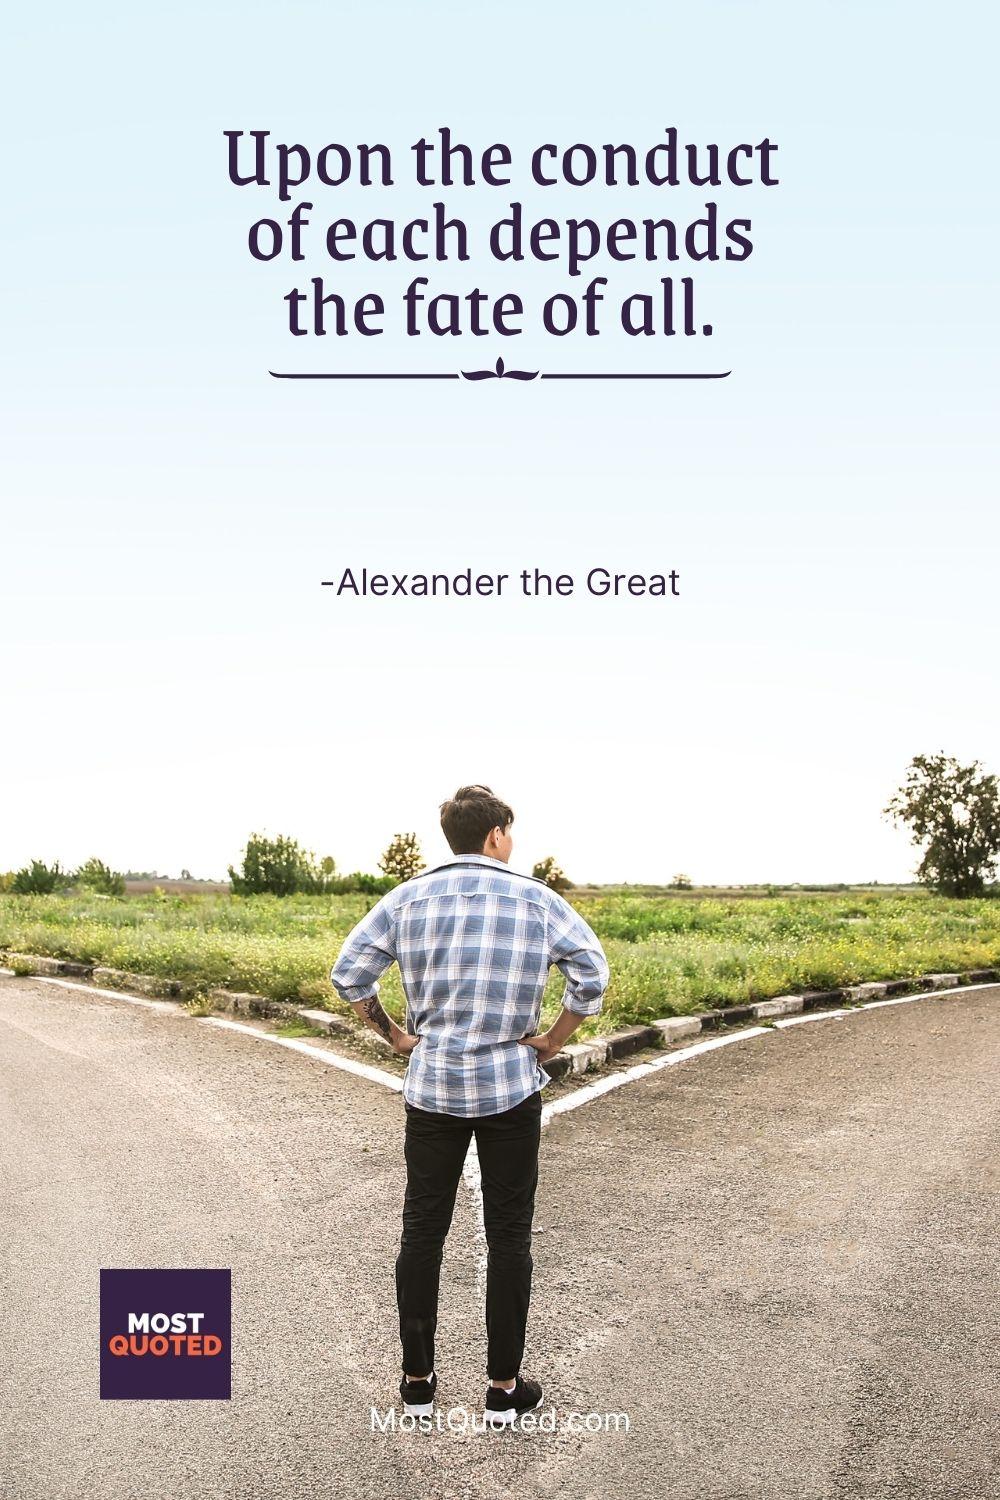 Upon the conduct of each depends the fate of all. - Alexander the Great